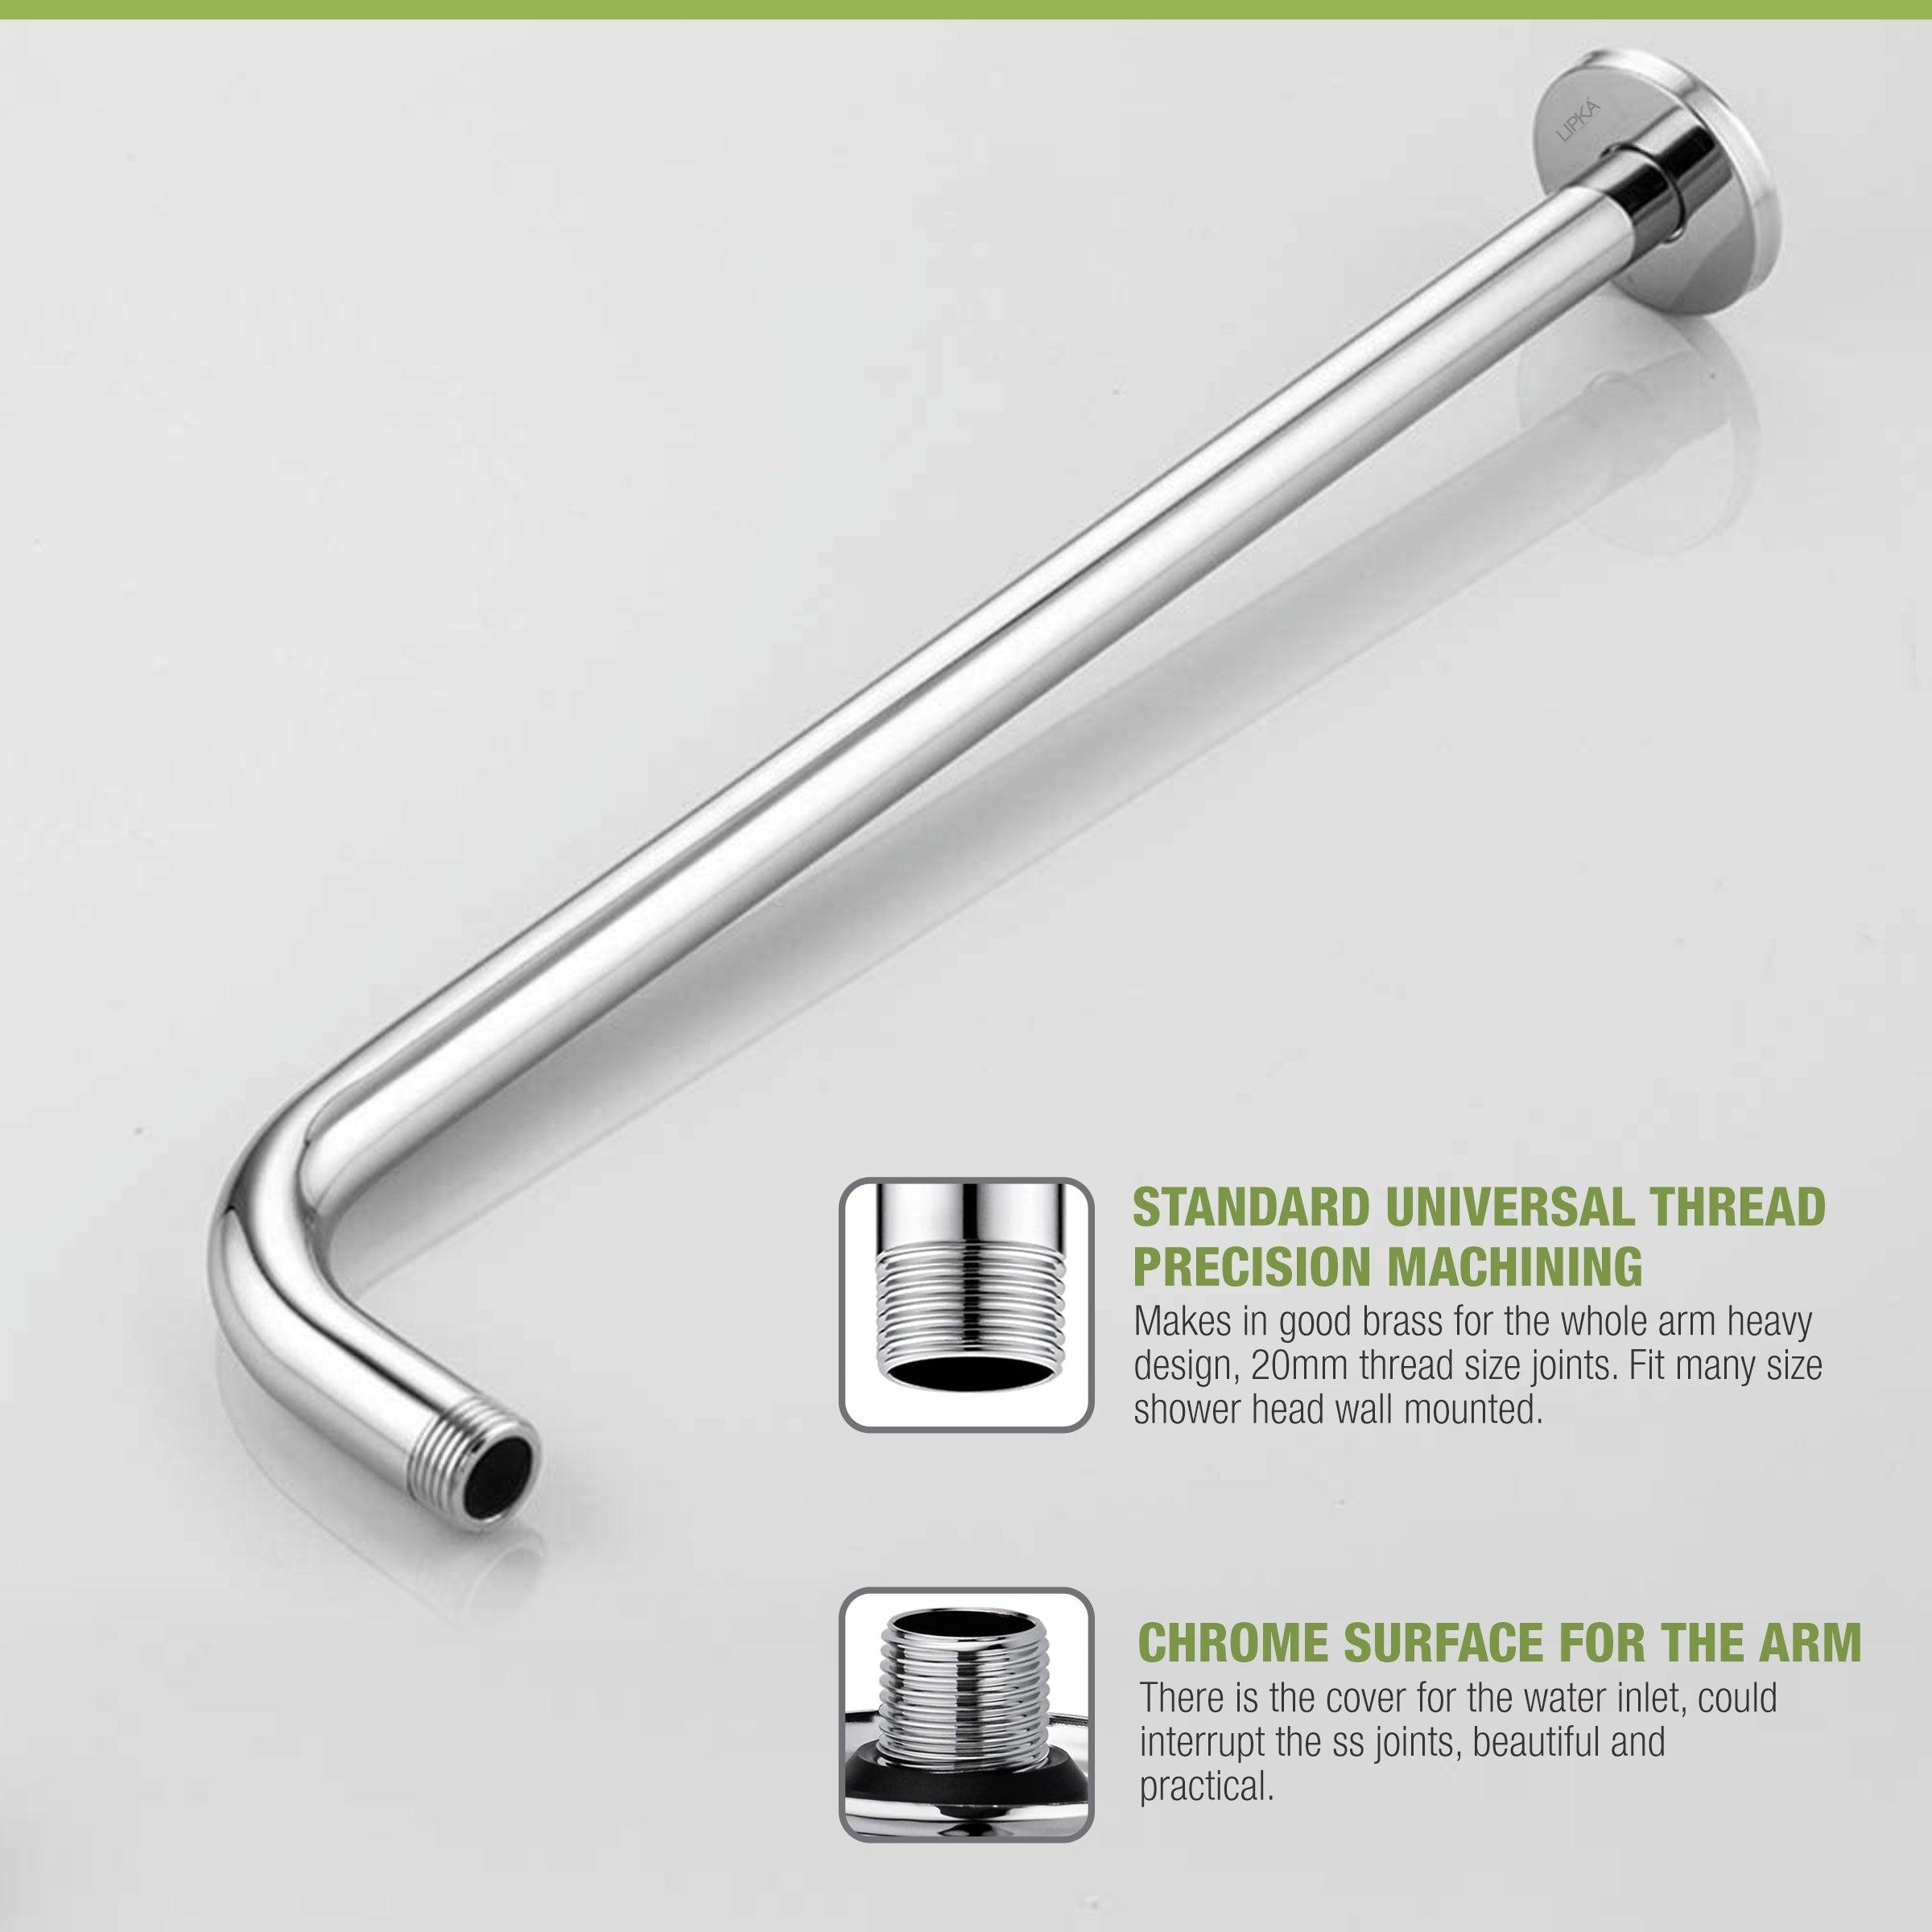 Full Bend Round Shower Arm (24 Inches) features